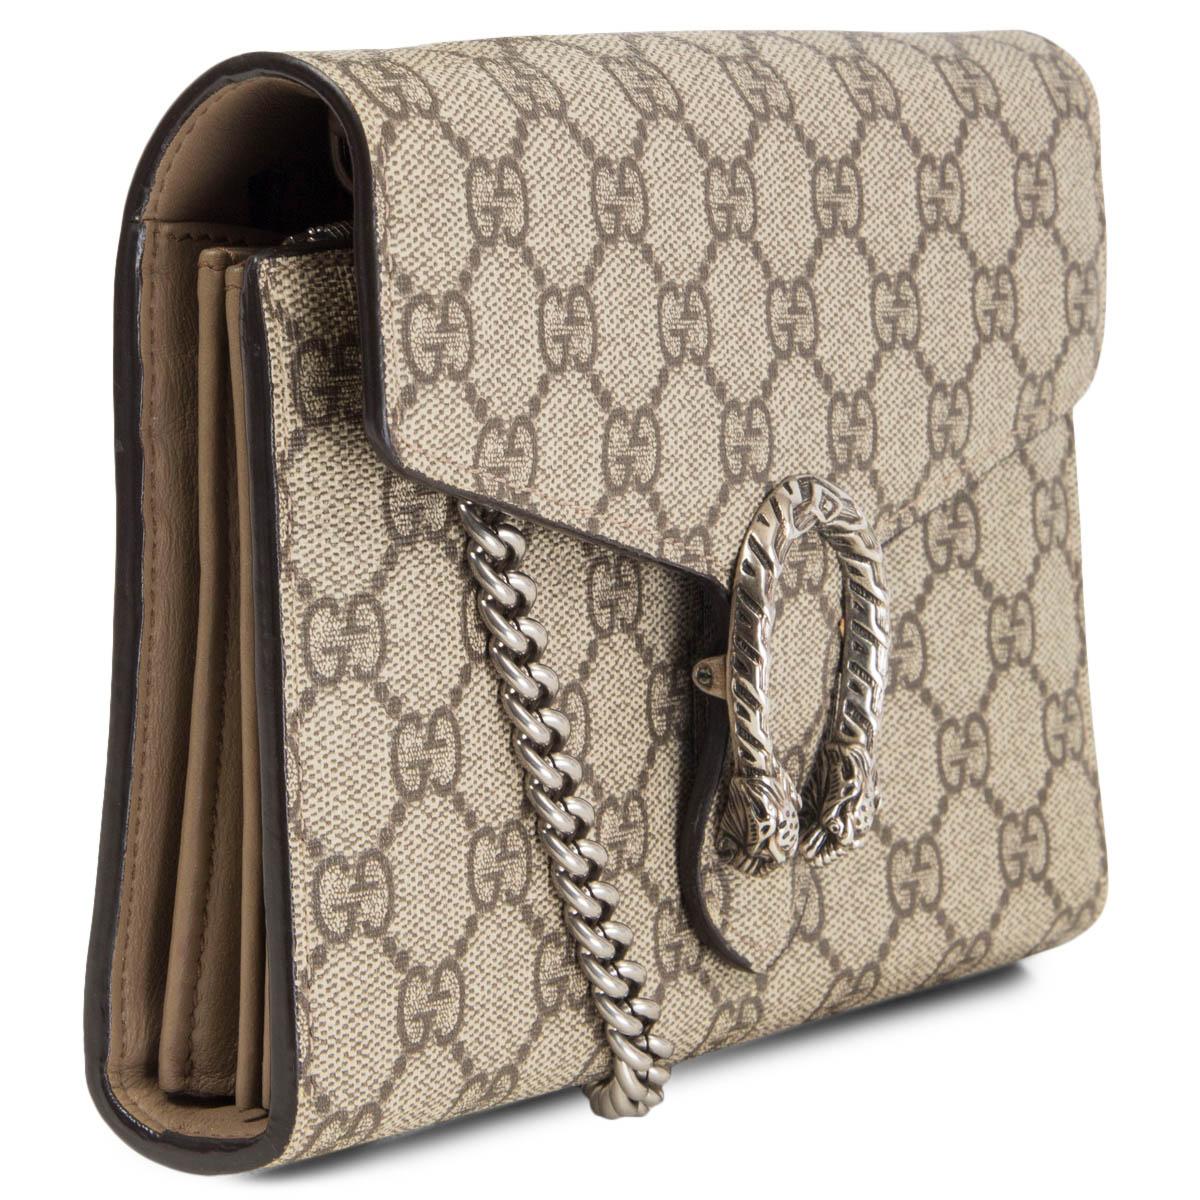 100% authentic Gucci Dionysus Wallet On Chain crossbody bag in beige and ebony GG Supreme Canvas. The closure has the textured tiger head spur closure-a unique detail referencing the Greek god Dionysus, who in myth is said to have crossed the river